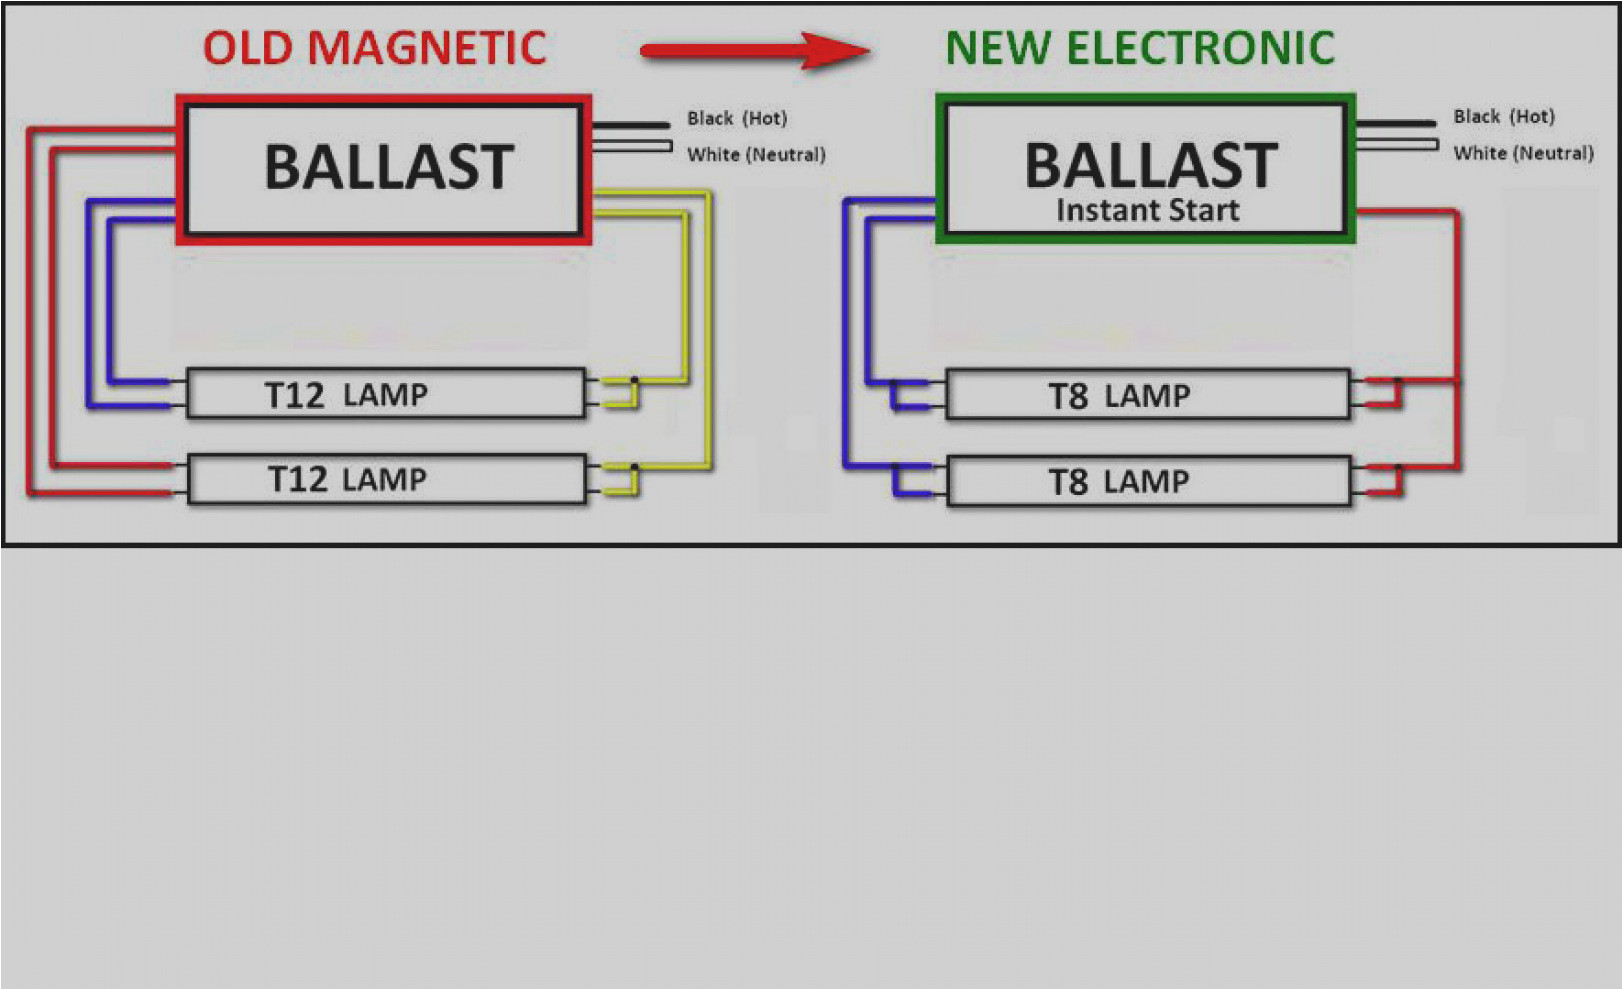 lamp 3lamp and 4lamp t12 ho magnetic fluorescent ballast wiring t12 ballast wiring diagram 1 lamp with 2 lamp fluorescent ballast wiring diagrams